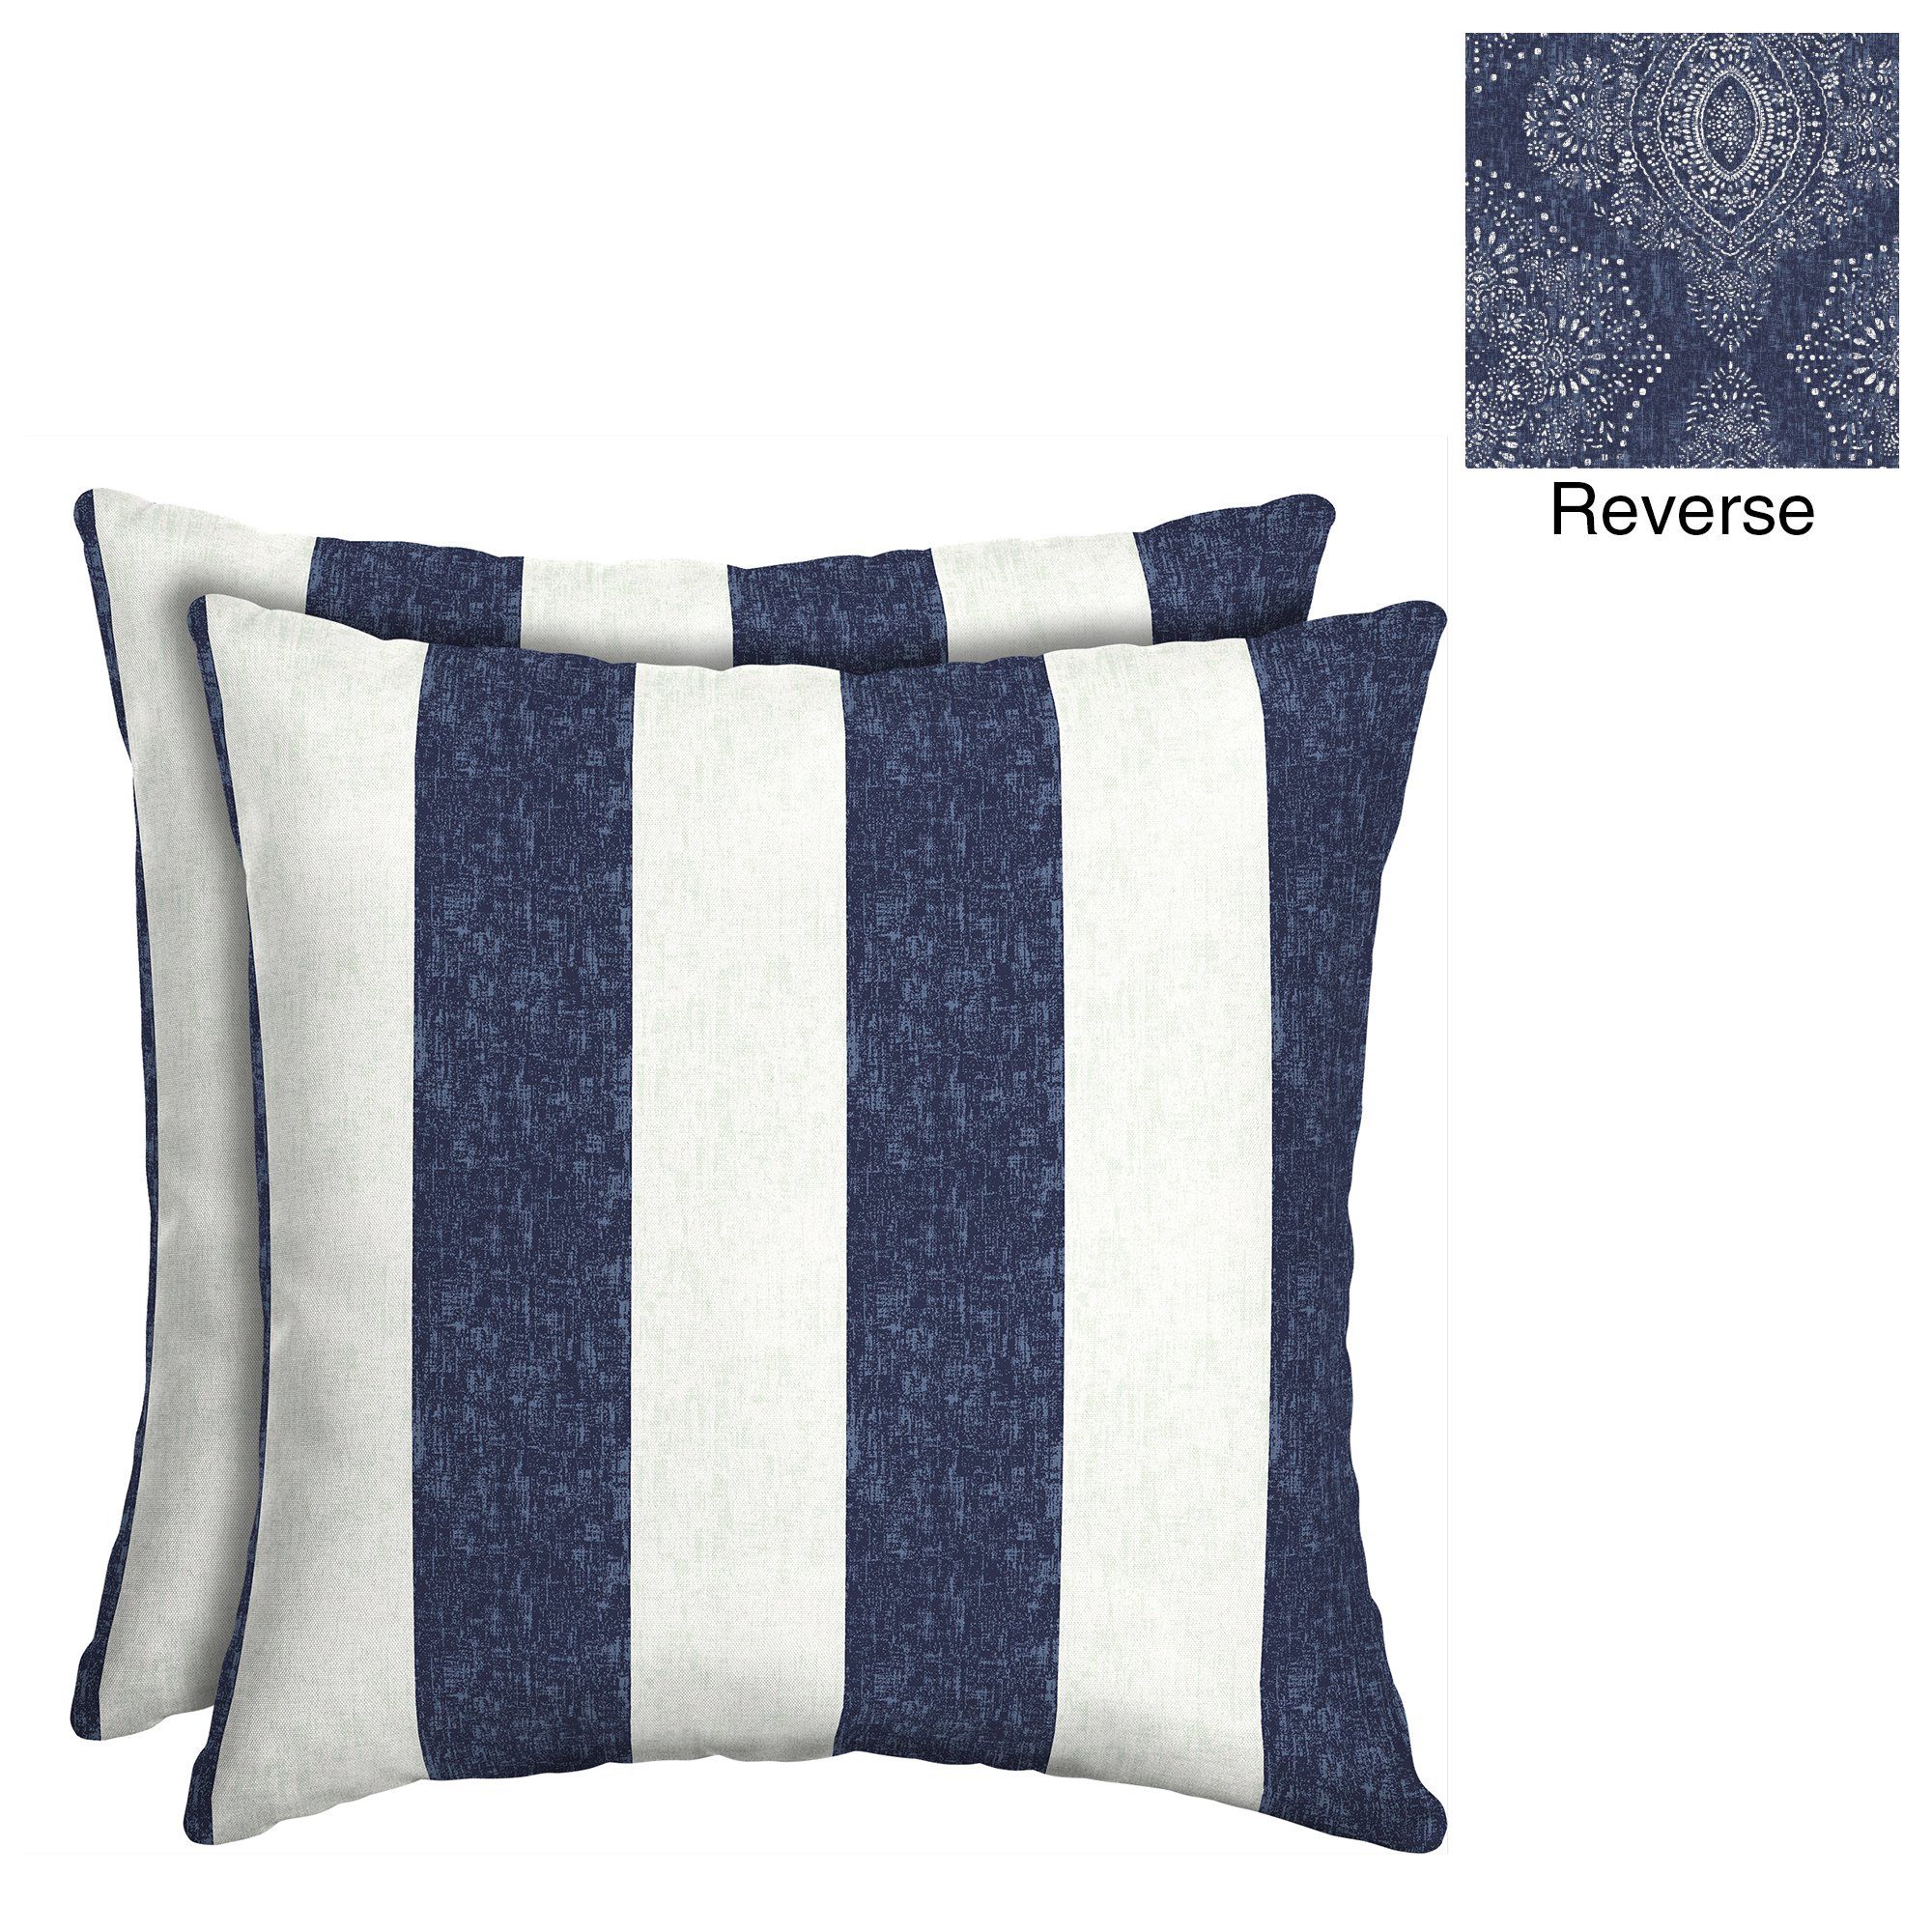 Better Homes & Gardens Blue Pointelized Ogee Stripe 16 in. Square Outdoor Toss Pillow - Set of 2 | Walmart (US)